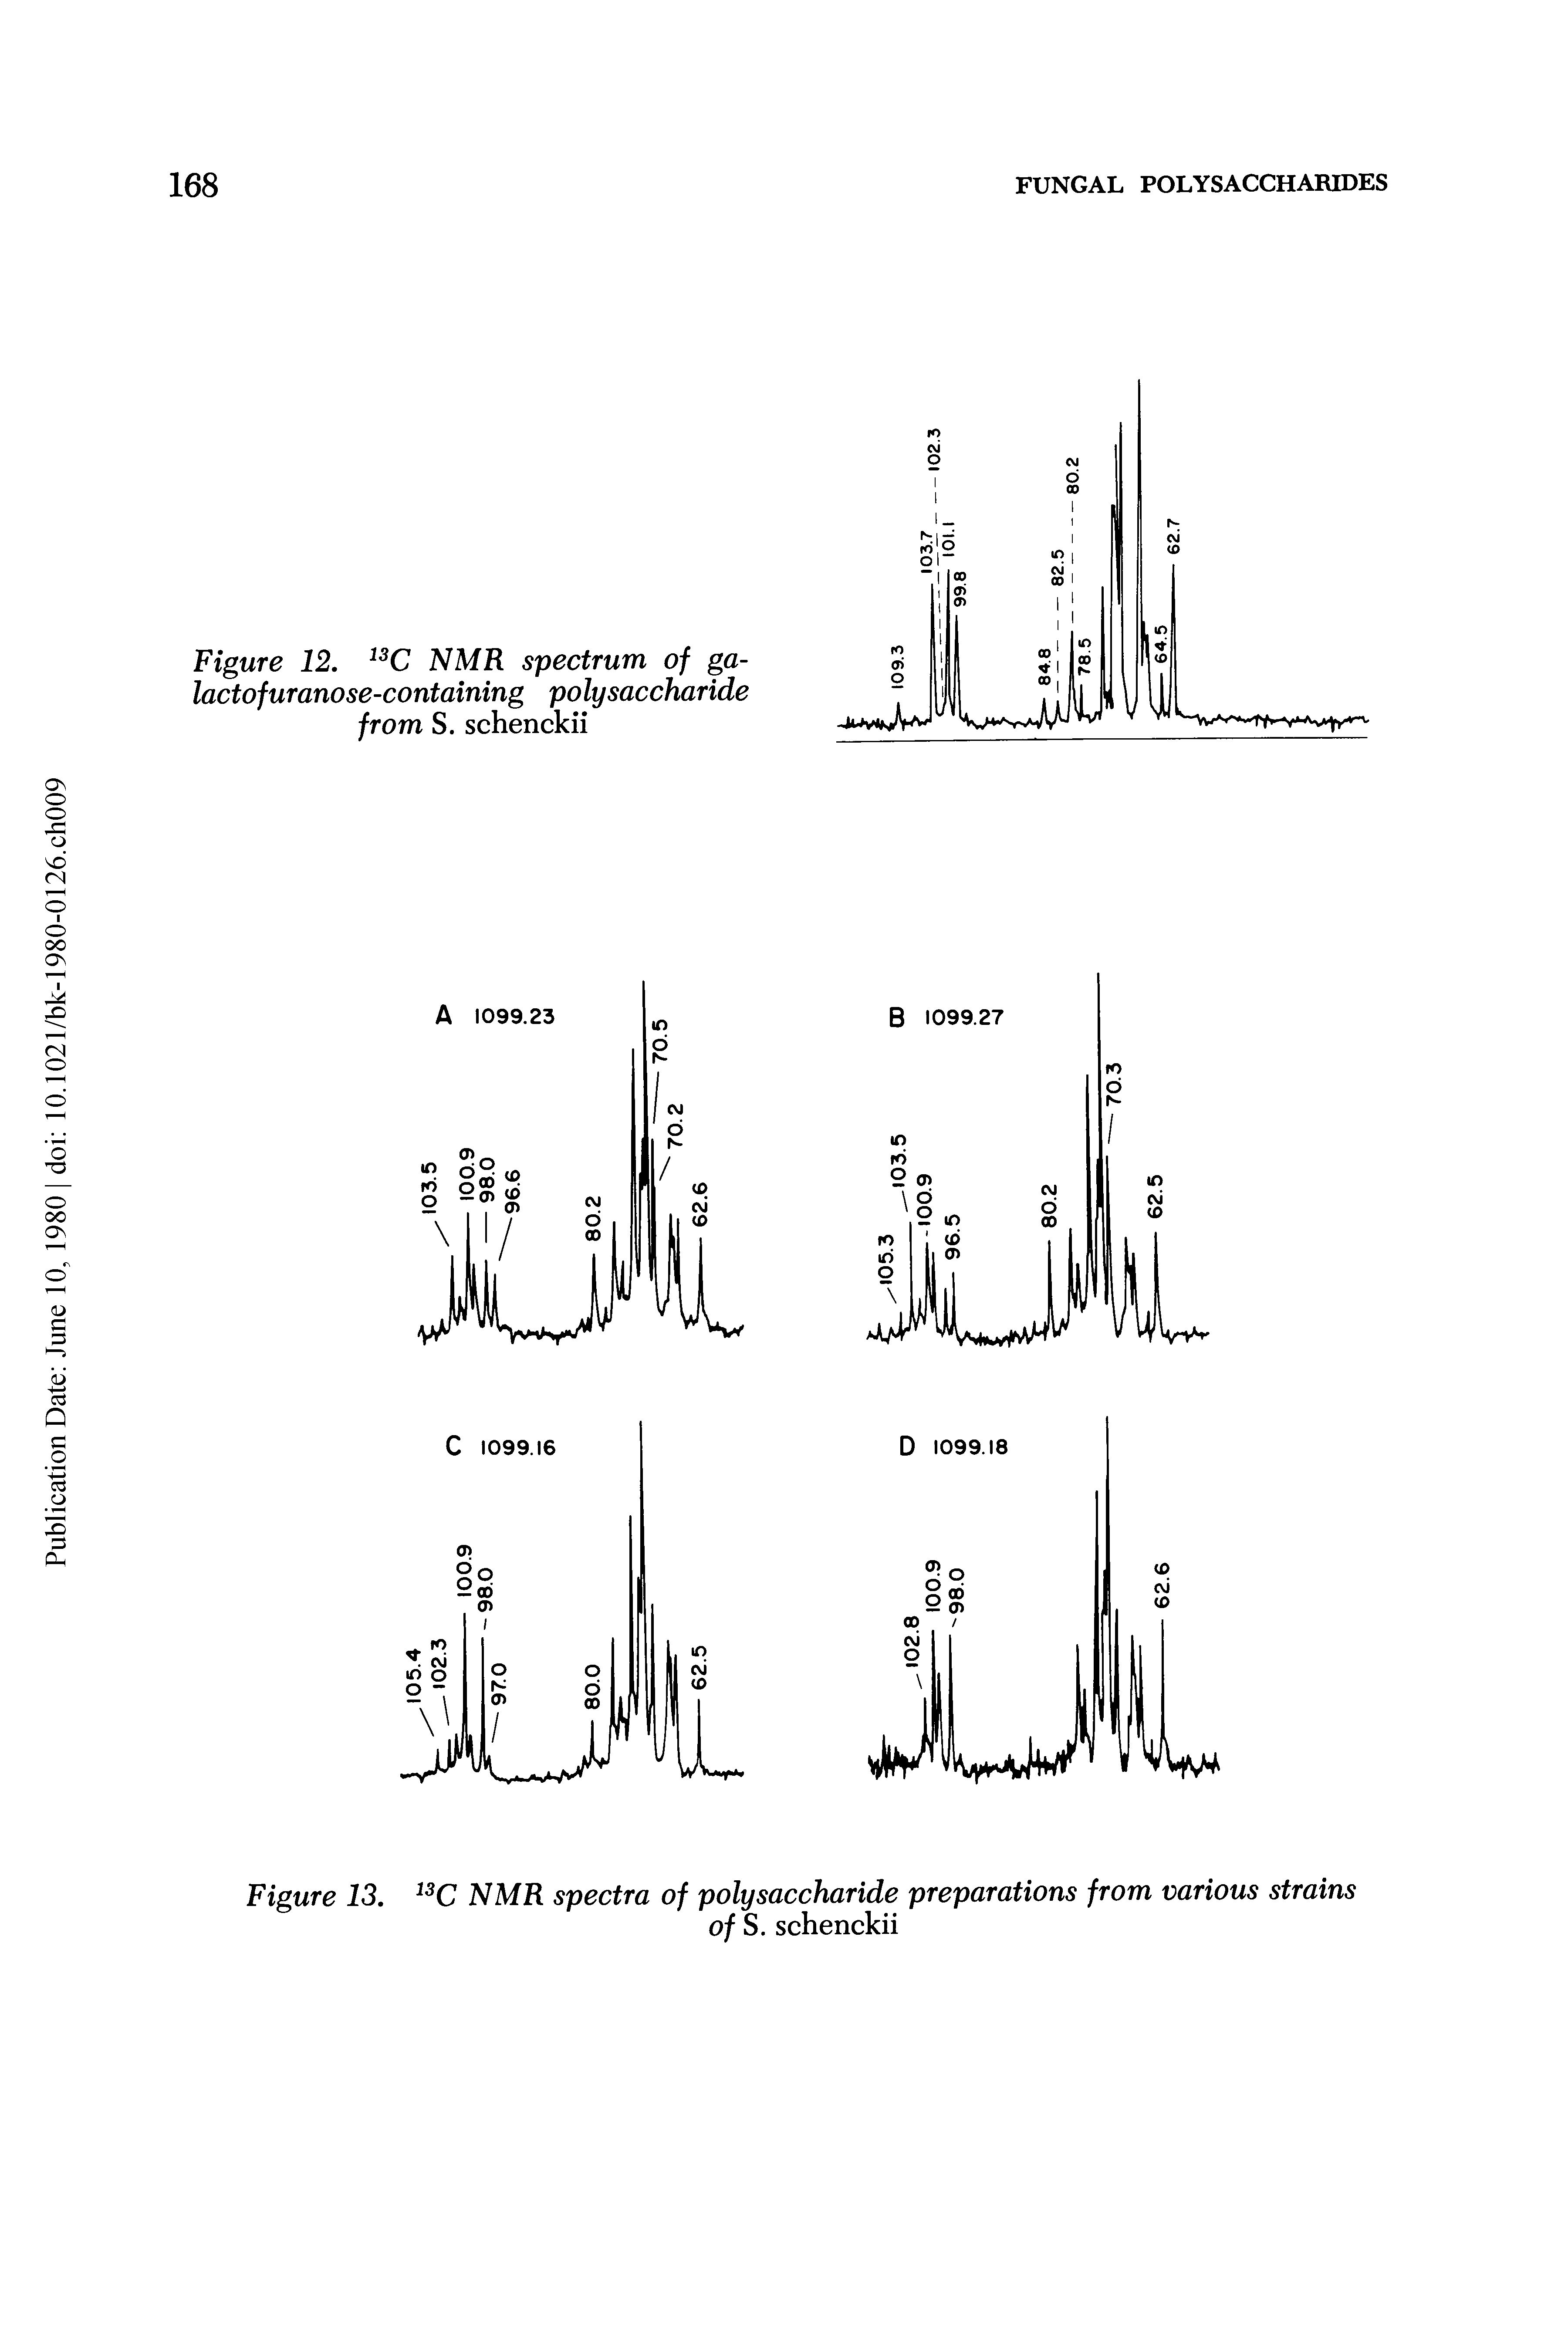 Figure 13. NMR spectra of polysaccharide preparations from various strains...